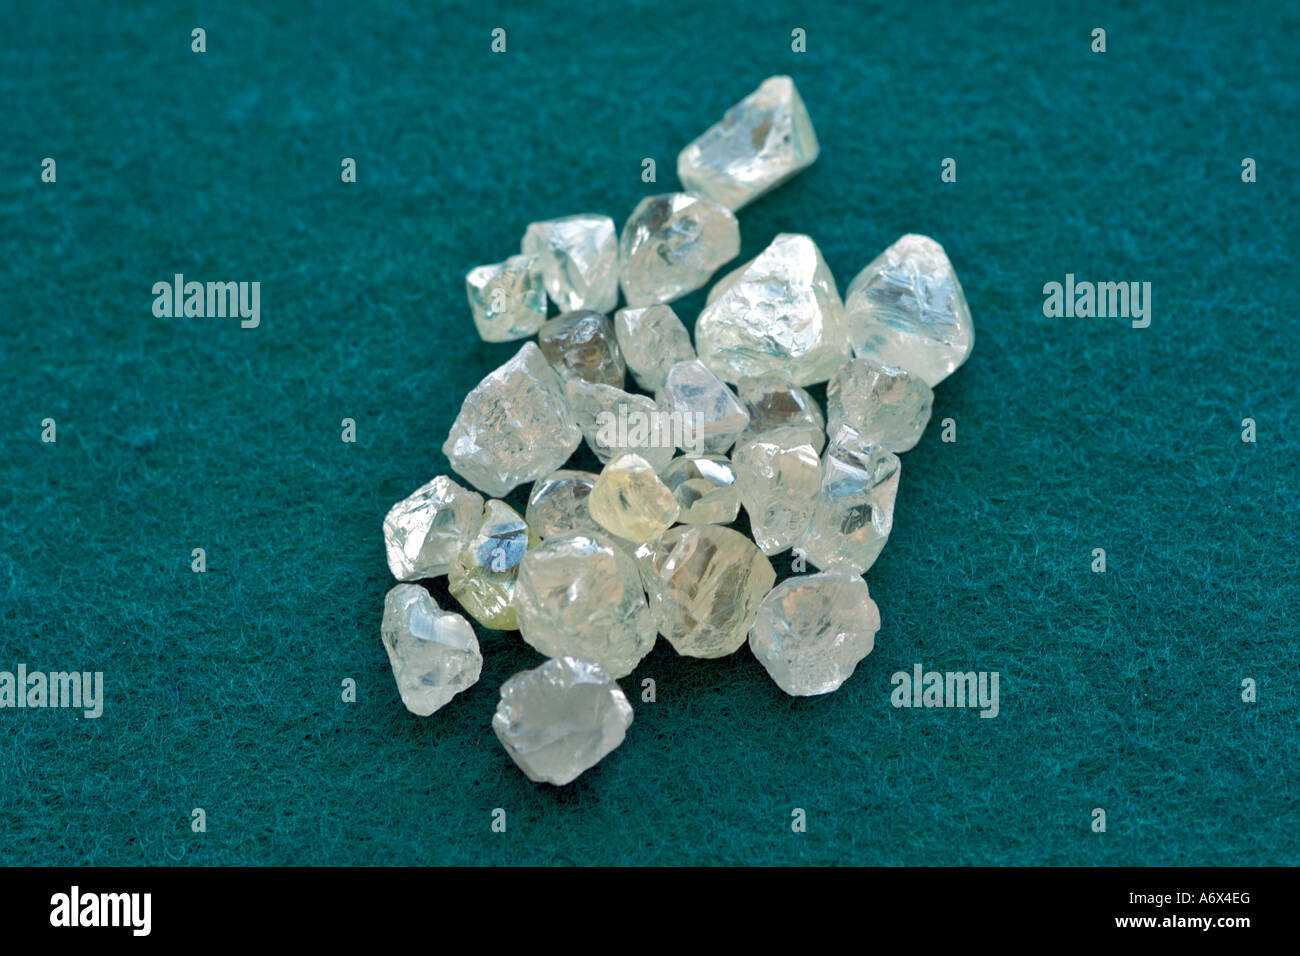 Uncut diamonds in the sorting room at De Beers Diamond Trading Company in Harry Oppenheimer House in Kimberley South Africa. Stock Photo